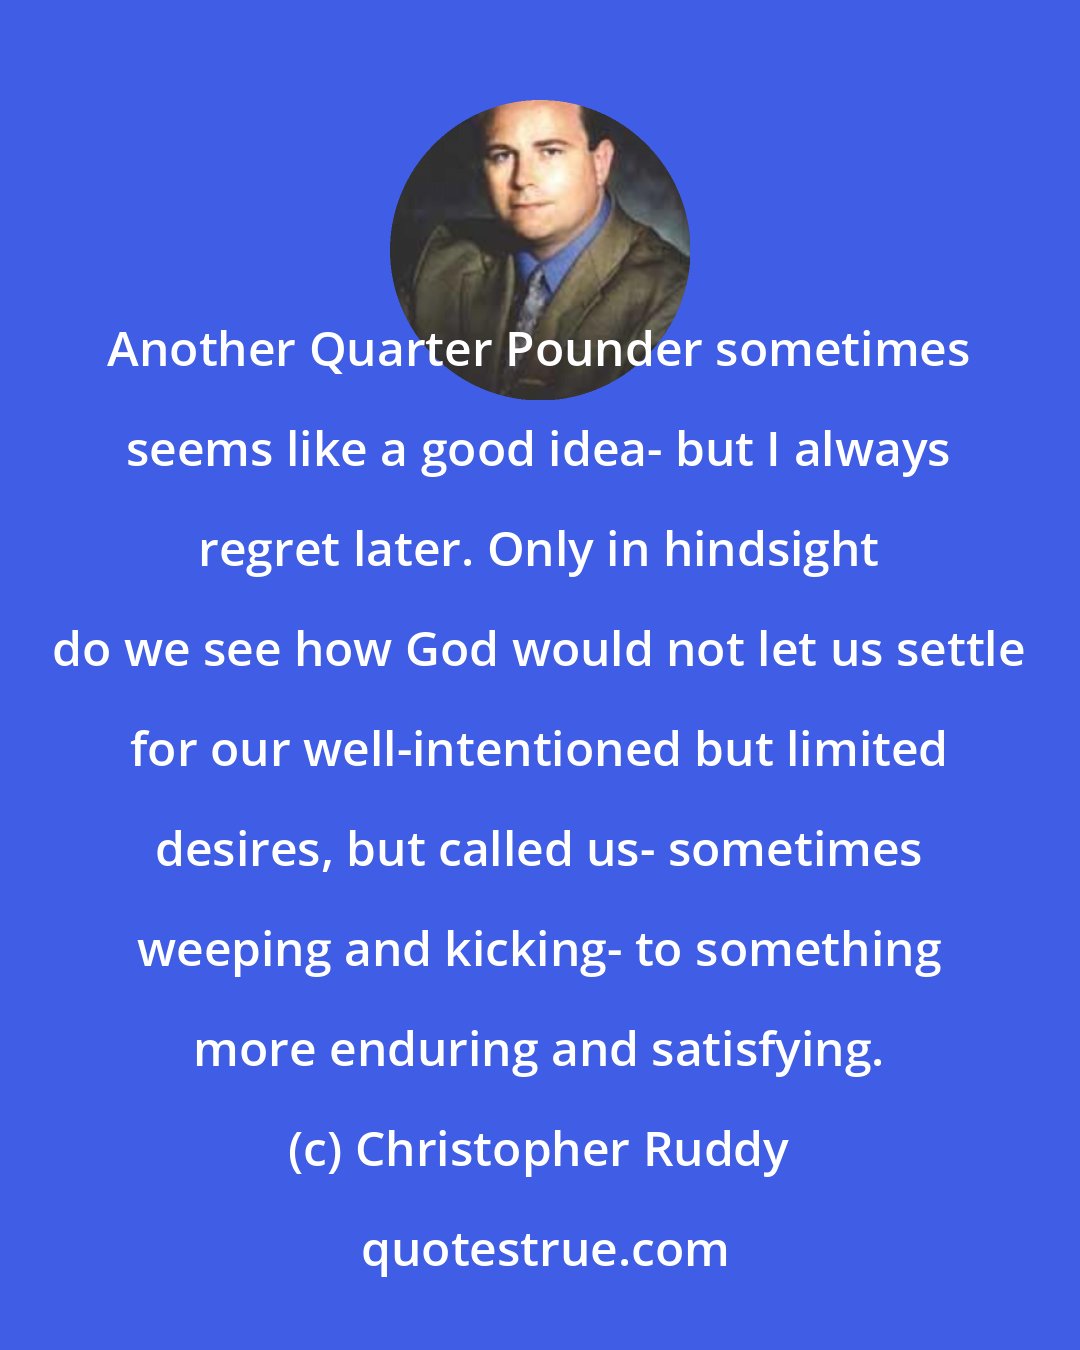 Christopher Ruddy: Another Quarter Pounder sometimes seems like a good idea- but I always regret later. Only in hindsight do we see how God would not let us settle for our well-intentioned but limited desires, but called us- sometimes weeping and kicking- to something more enduring and satisfying.